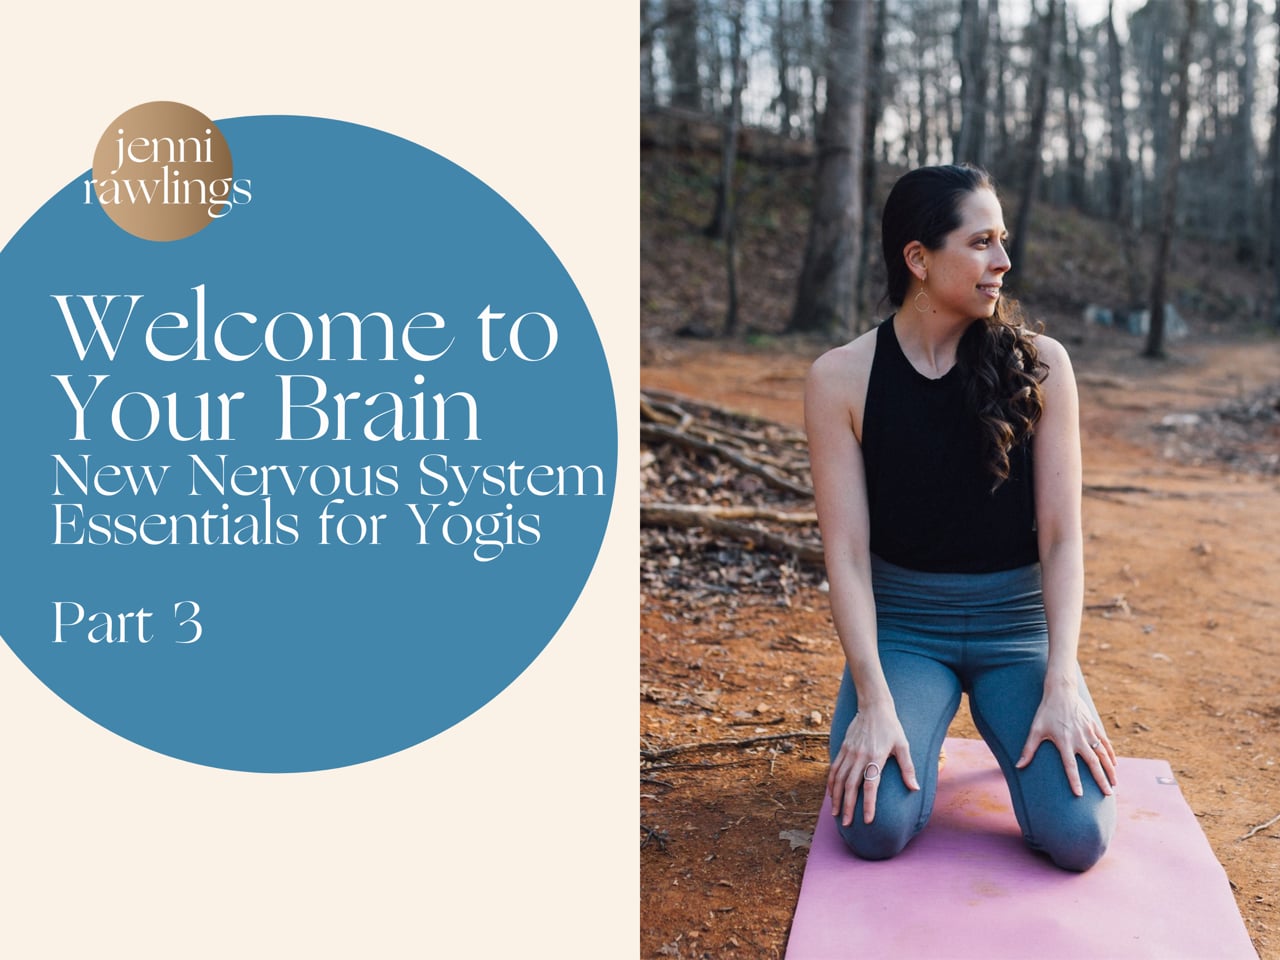 Part 3 – Welcome to Your Brain